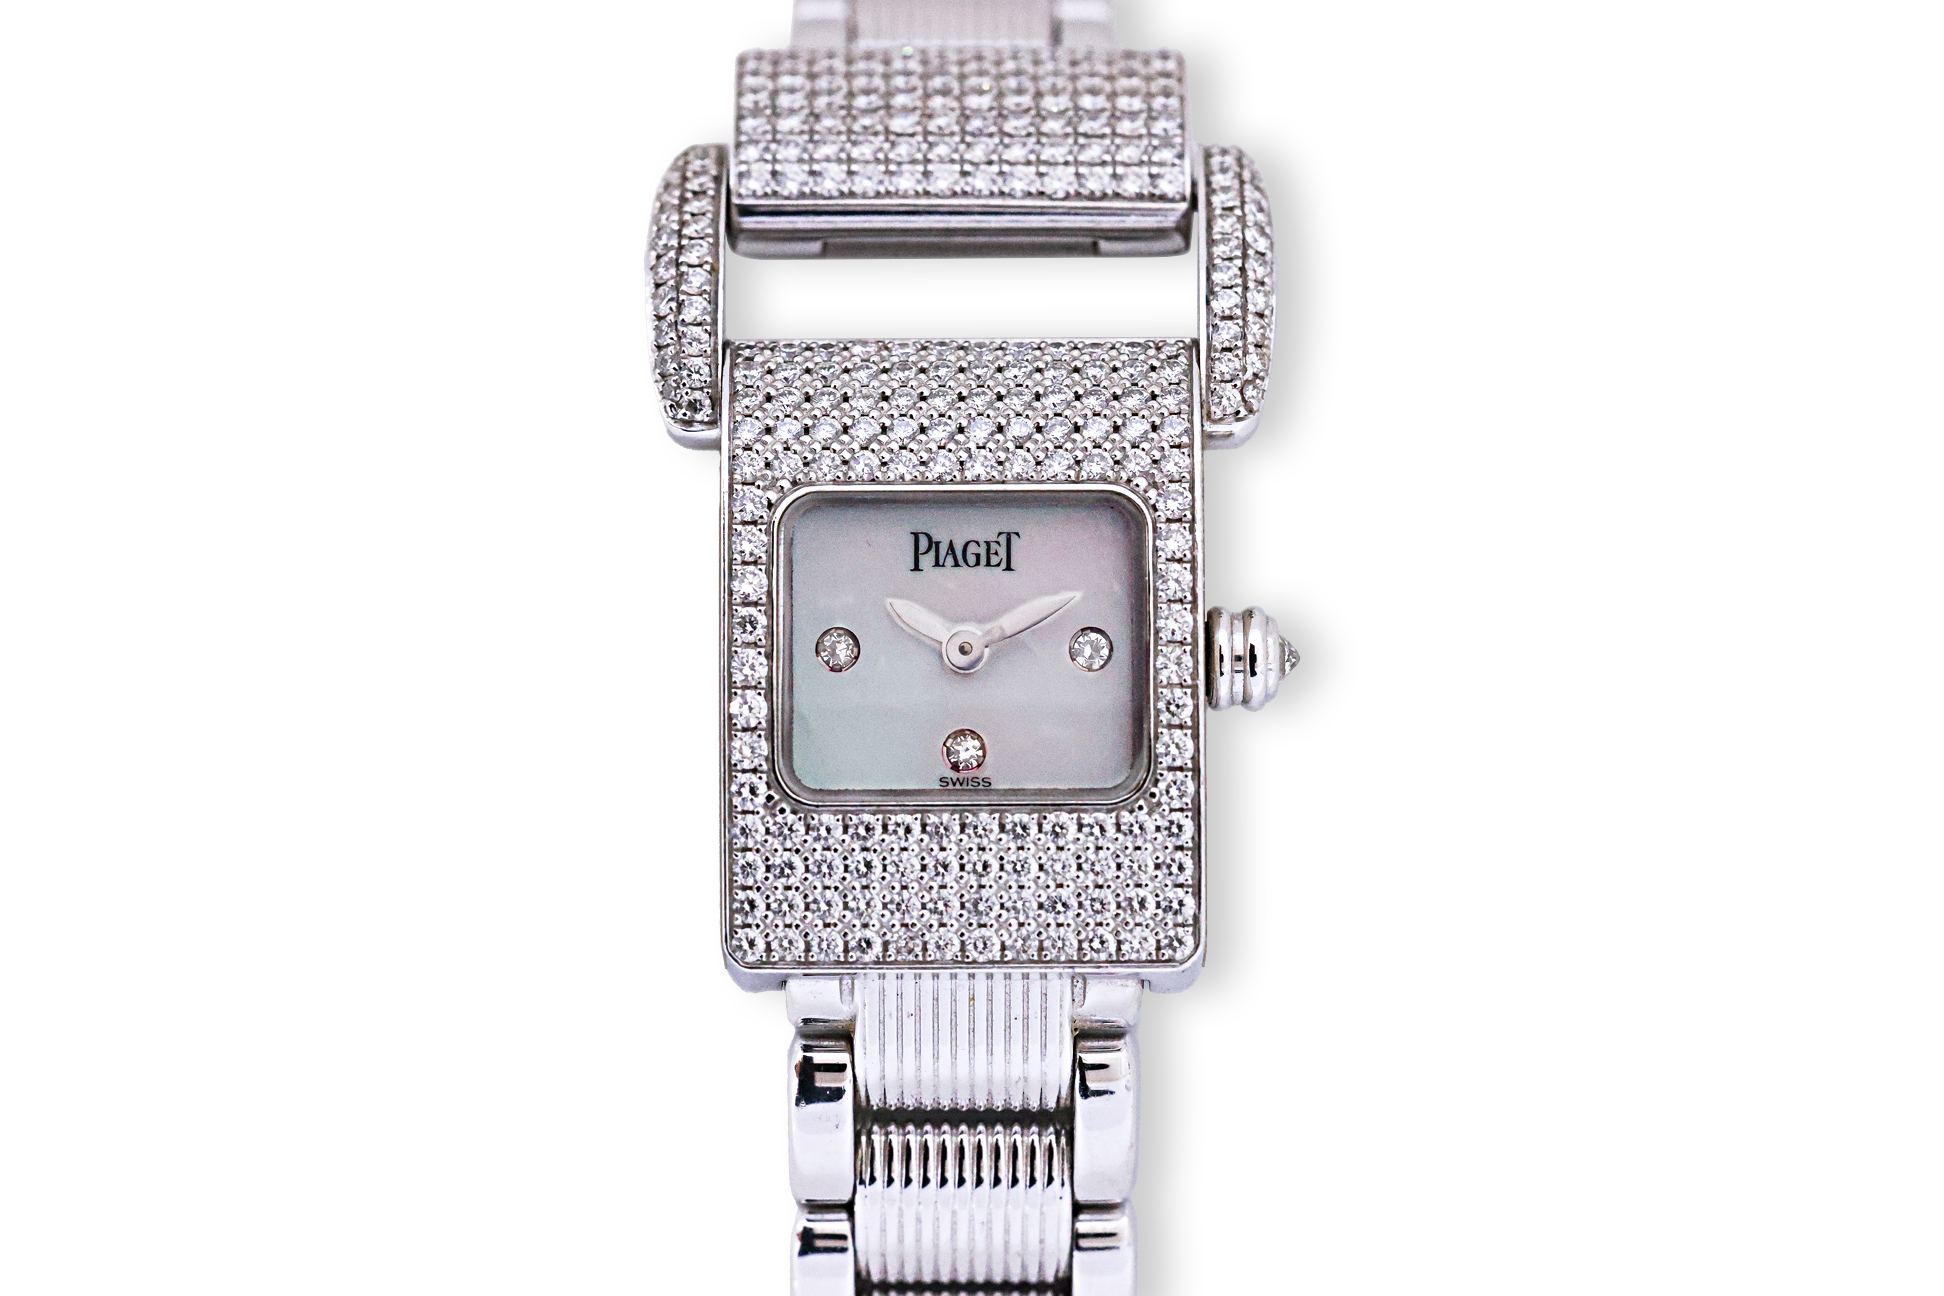 A PIAGET LADIES WHITE GOLD AND DIAMOND BRACELET WATCH